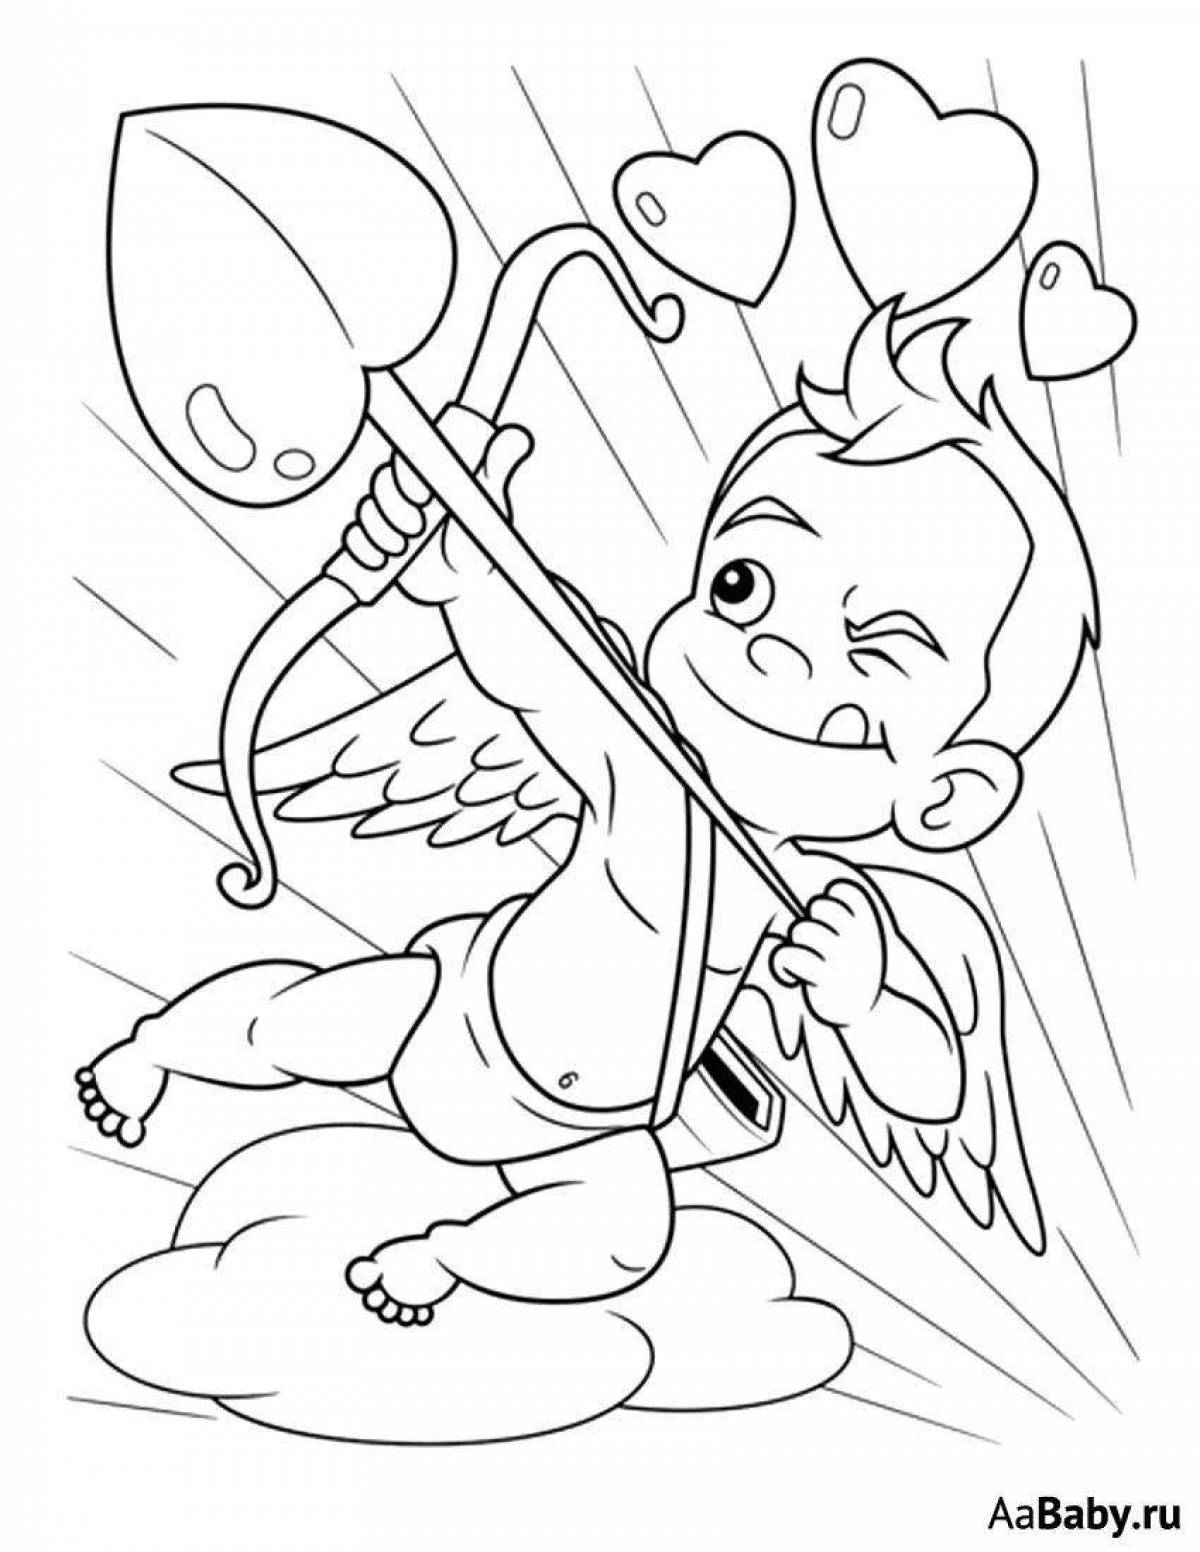 Colorful coloring cupid